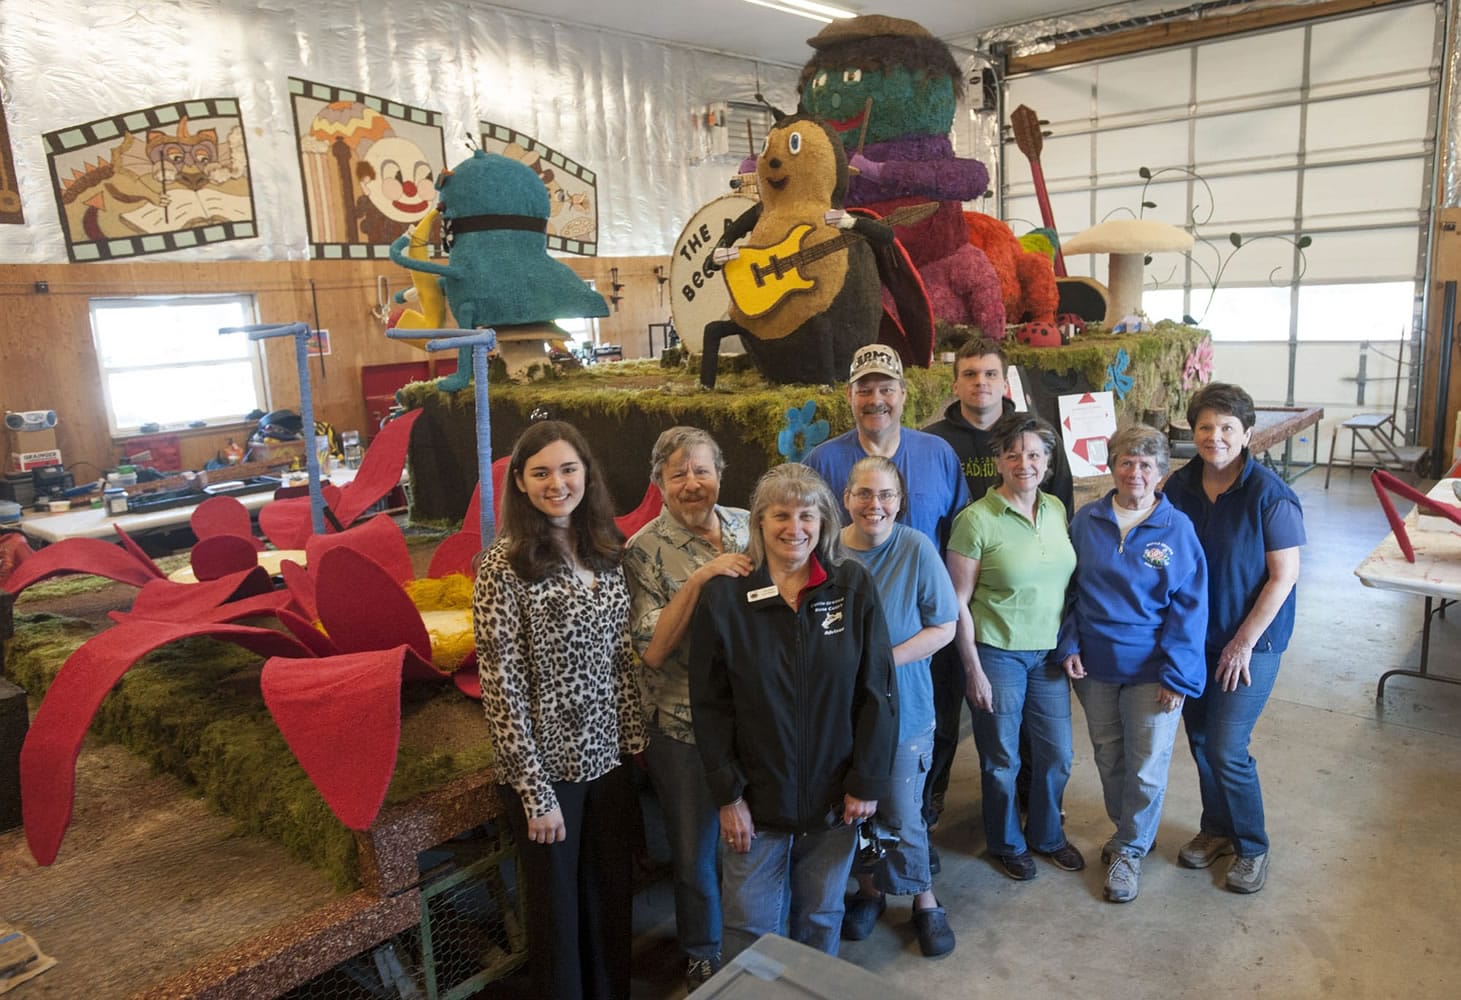 The Columbian
Just a few of the many volunteers who built or contributed to Battle Ground's float this year: from left, Adeena Wade, Rich Rubin, Trish Rubin, Tammy Burton, Mike Burton, Austin Alling, Barbara Garrison, Pat Stanfield and Shirley Stowell.